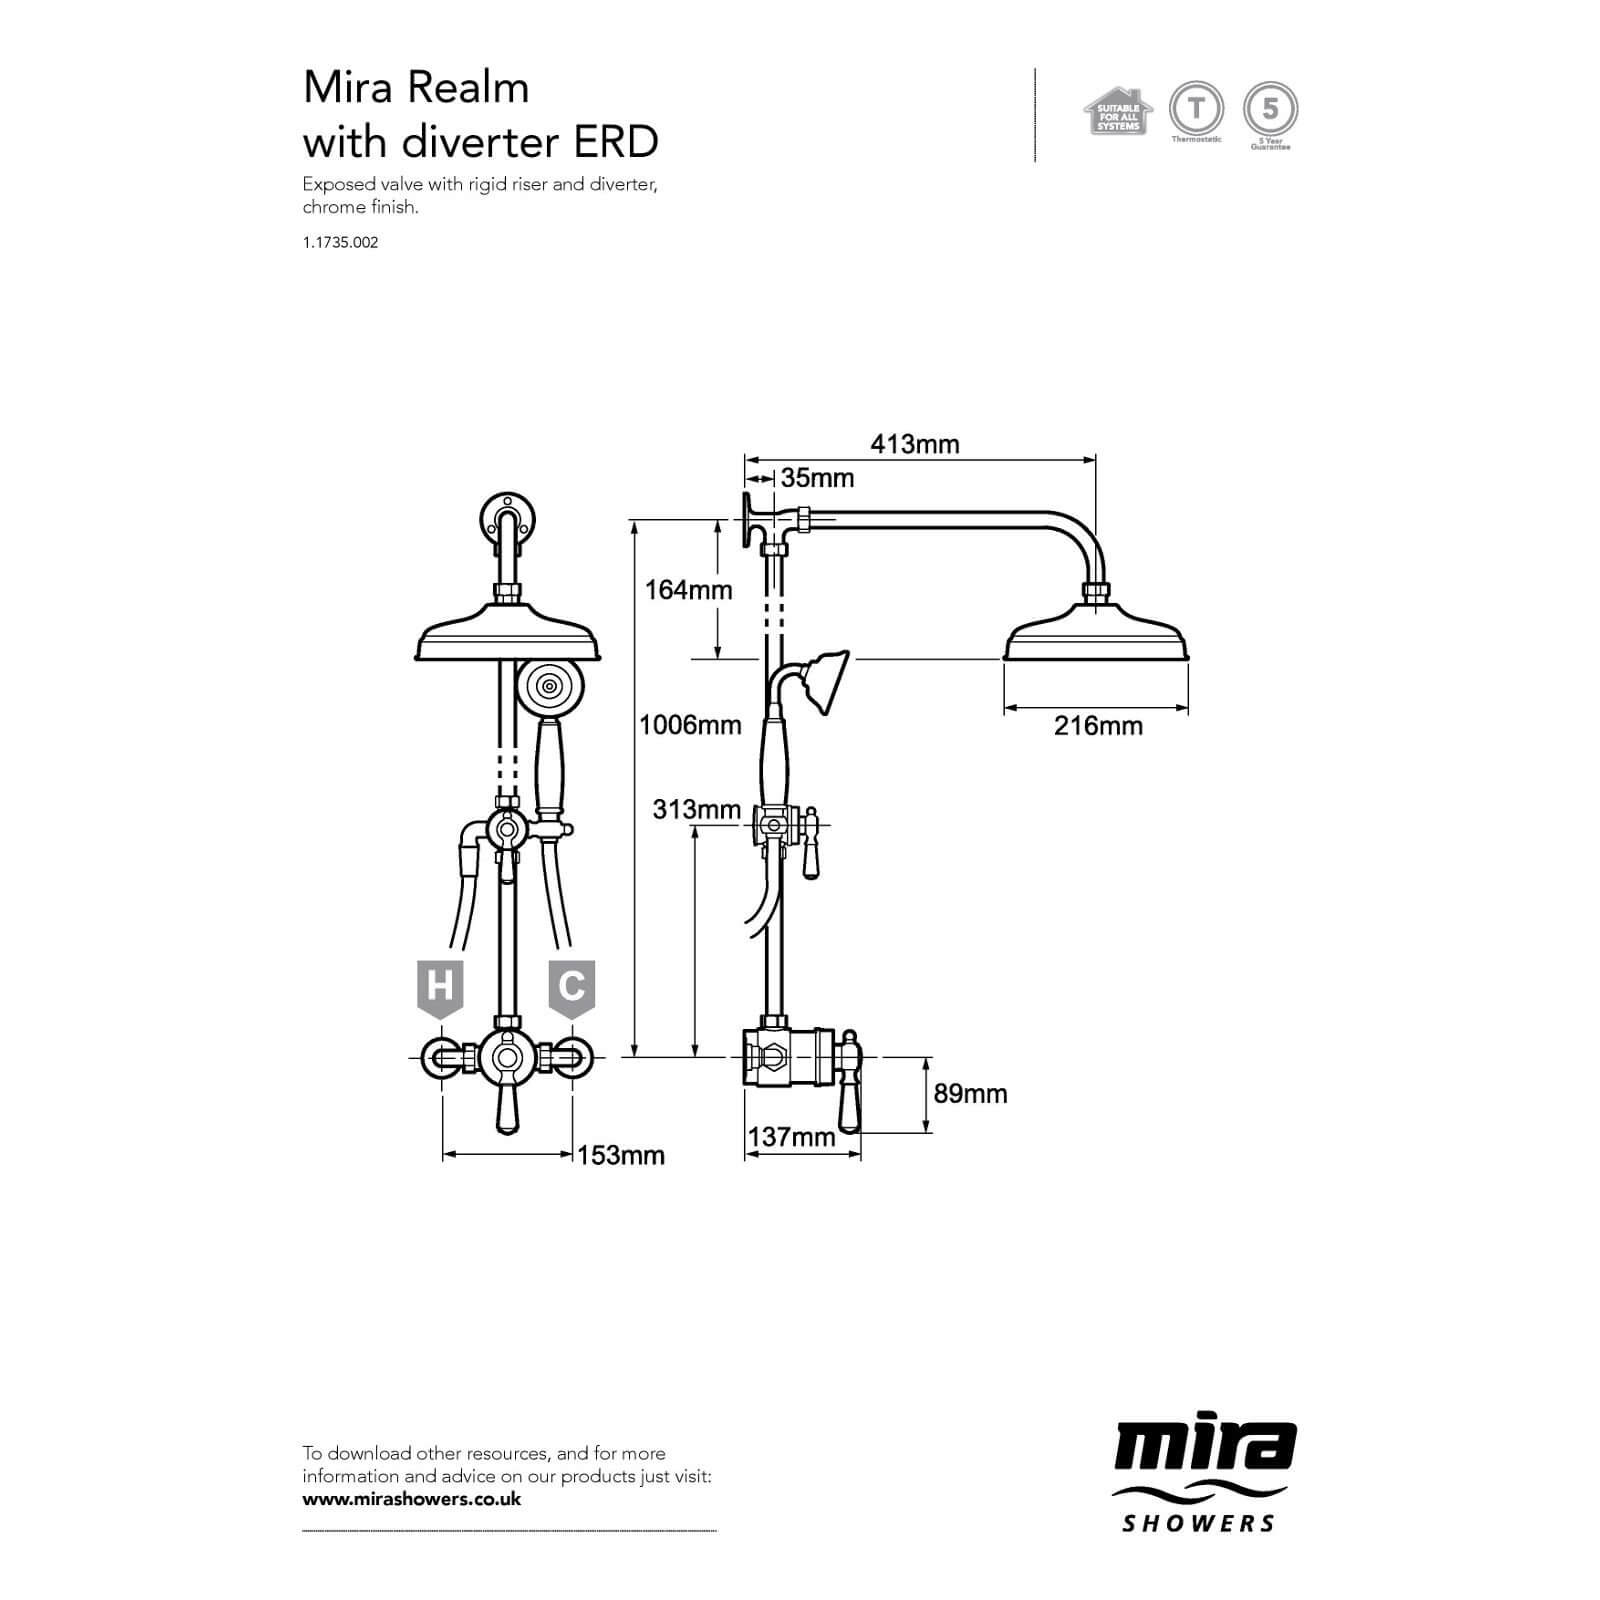 Mira Realm Traditional Mixer Shower